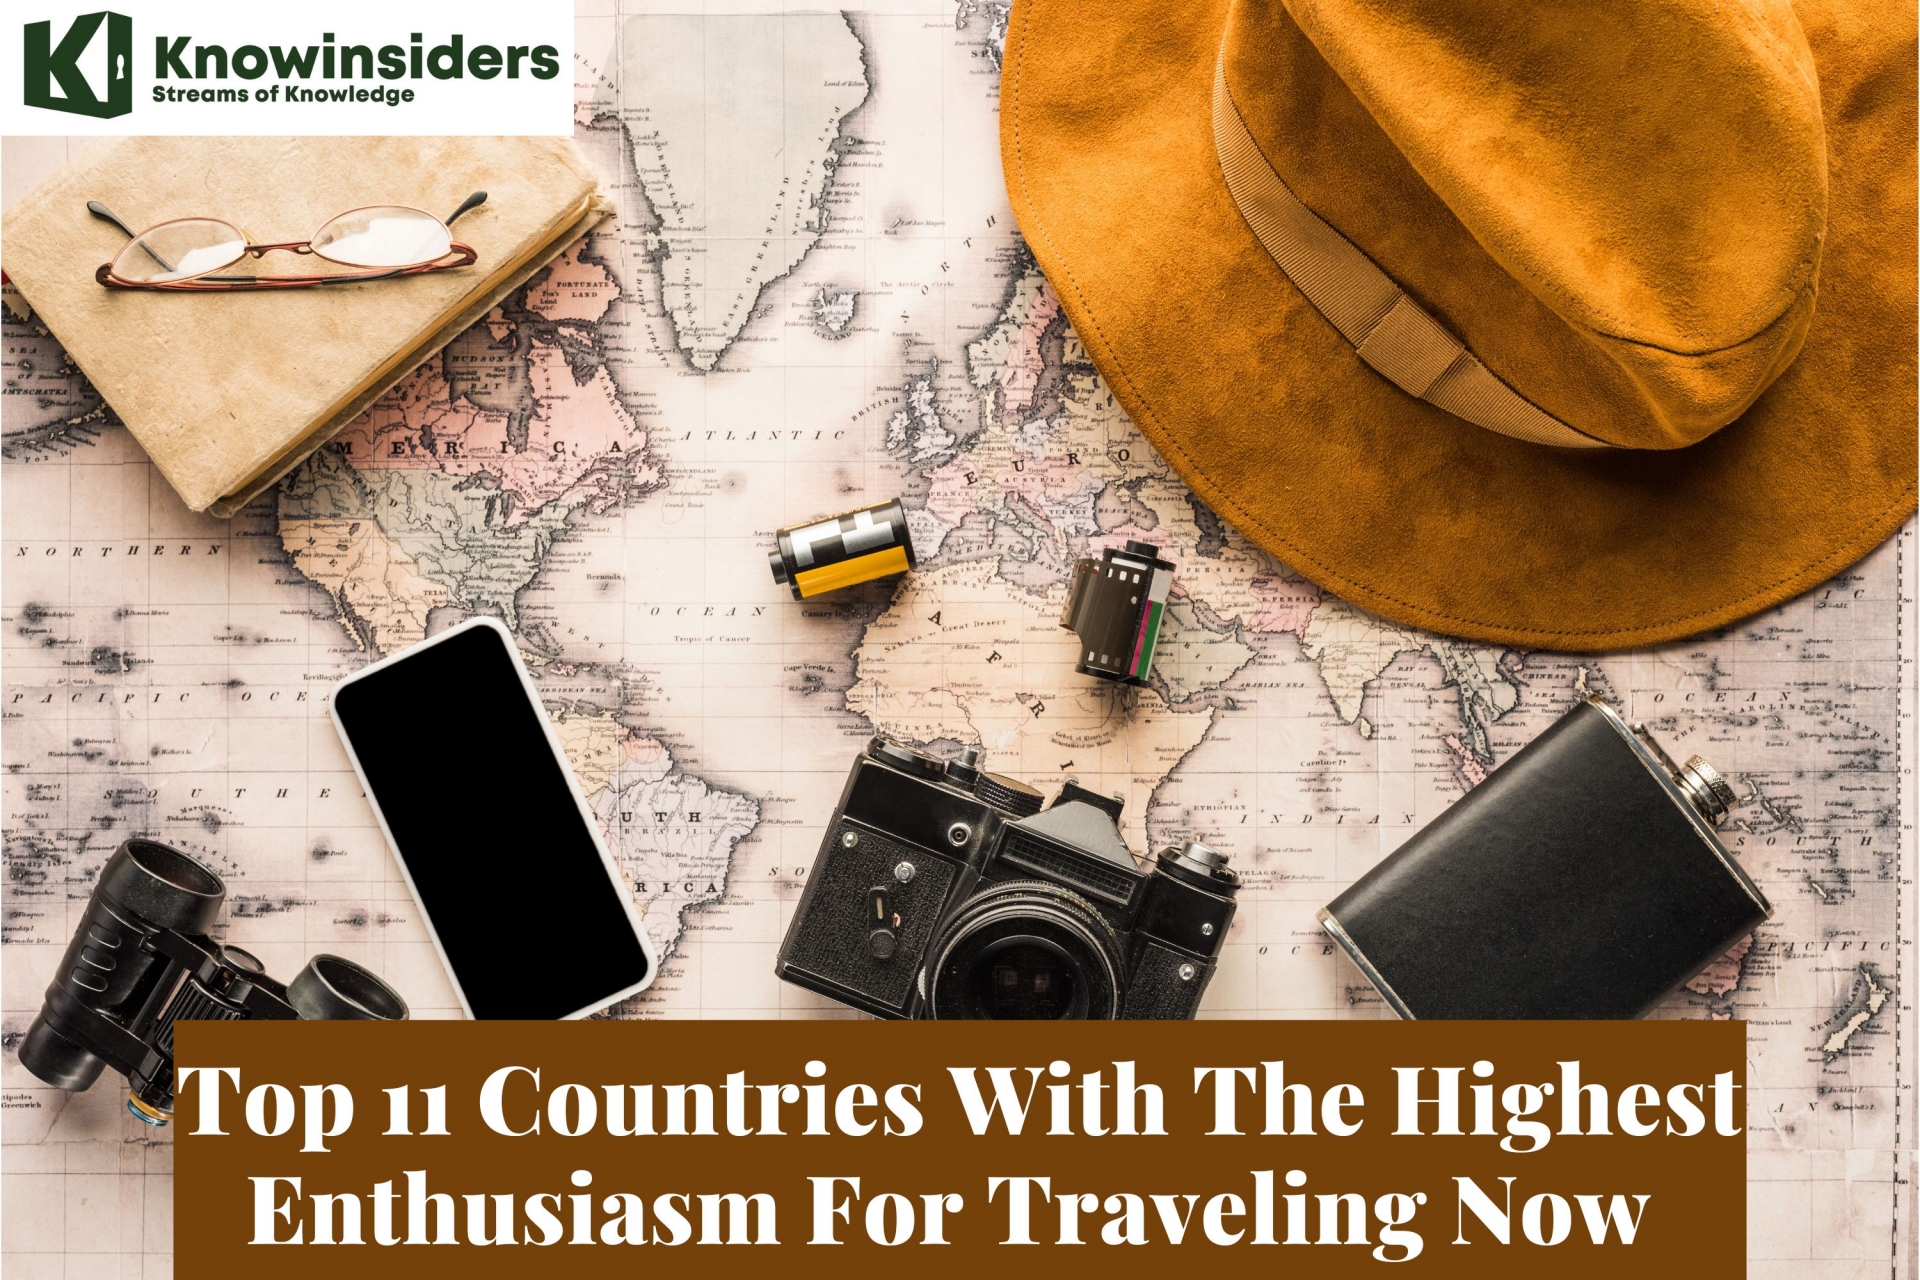 Top 11 Countries With The Highest Enthusiasm For Traveling Now 